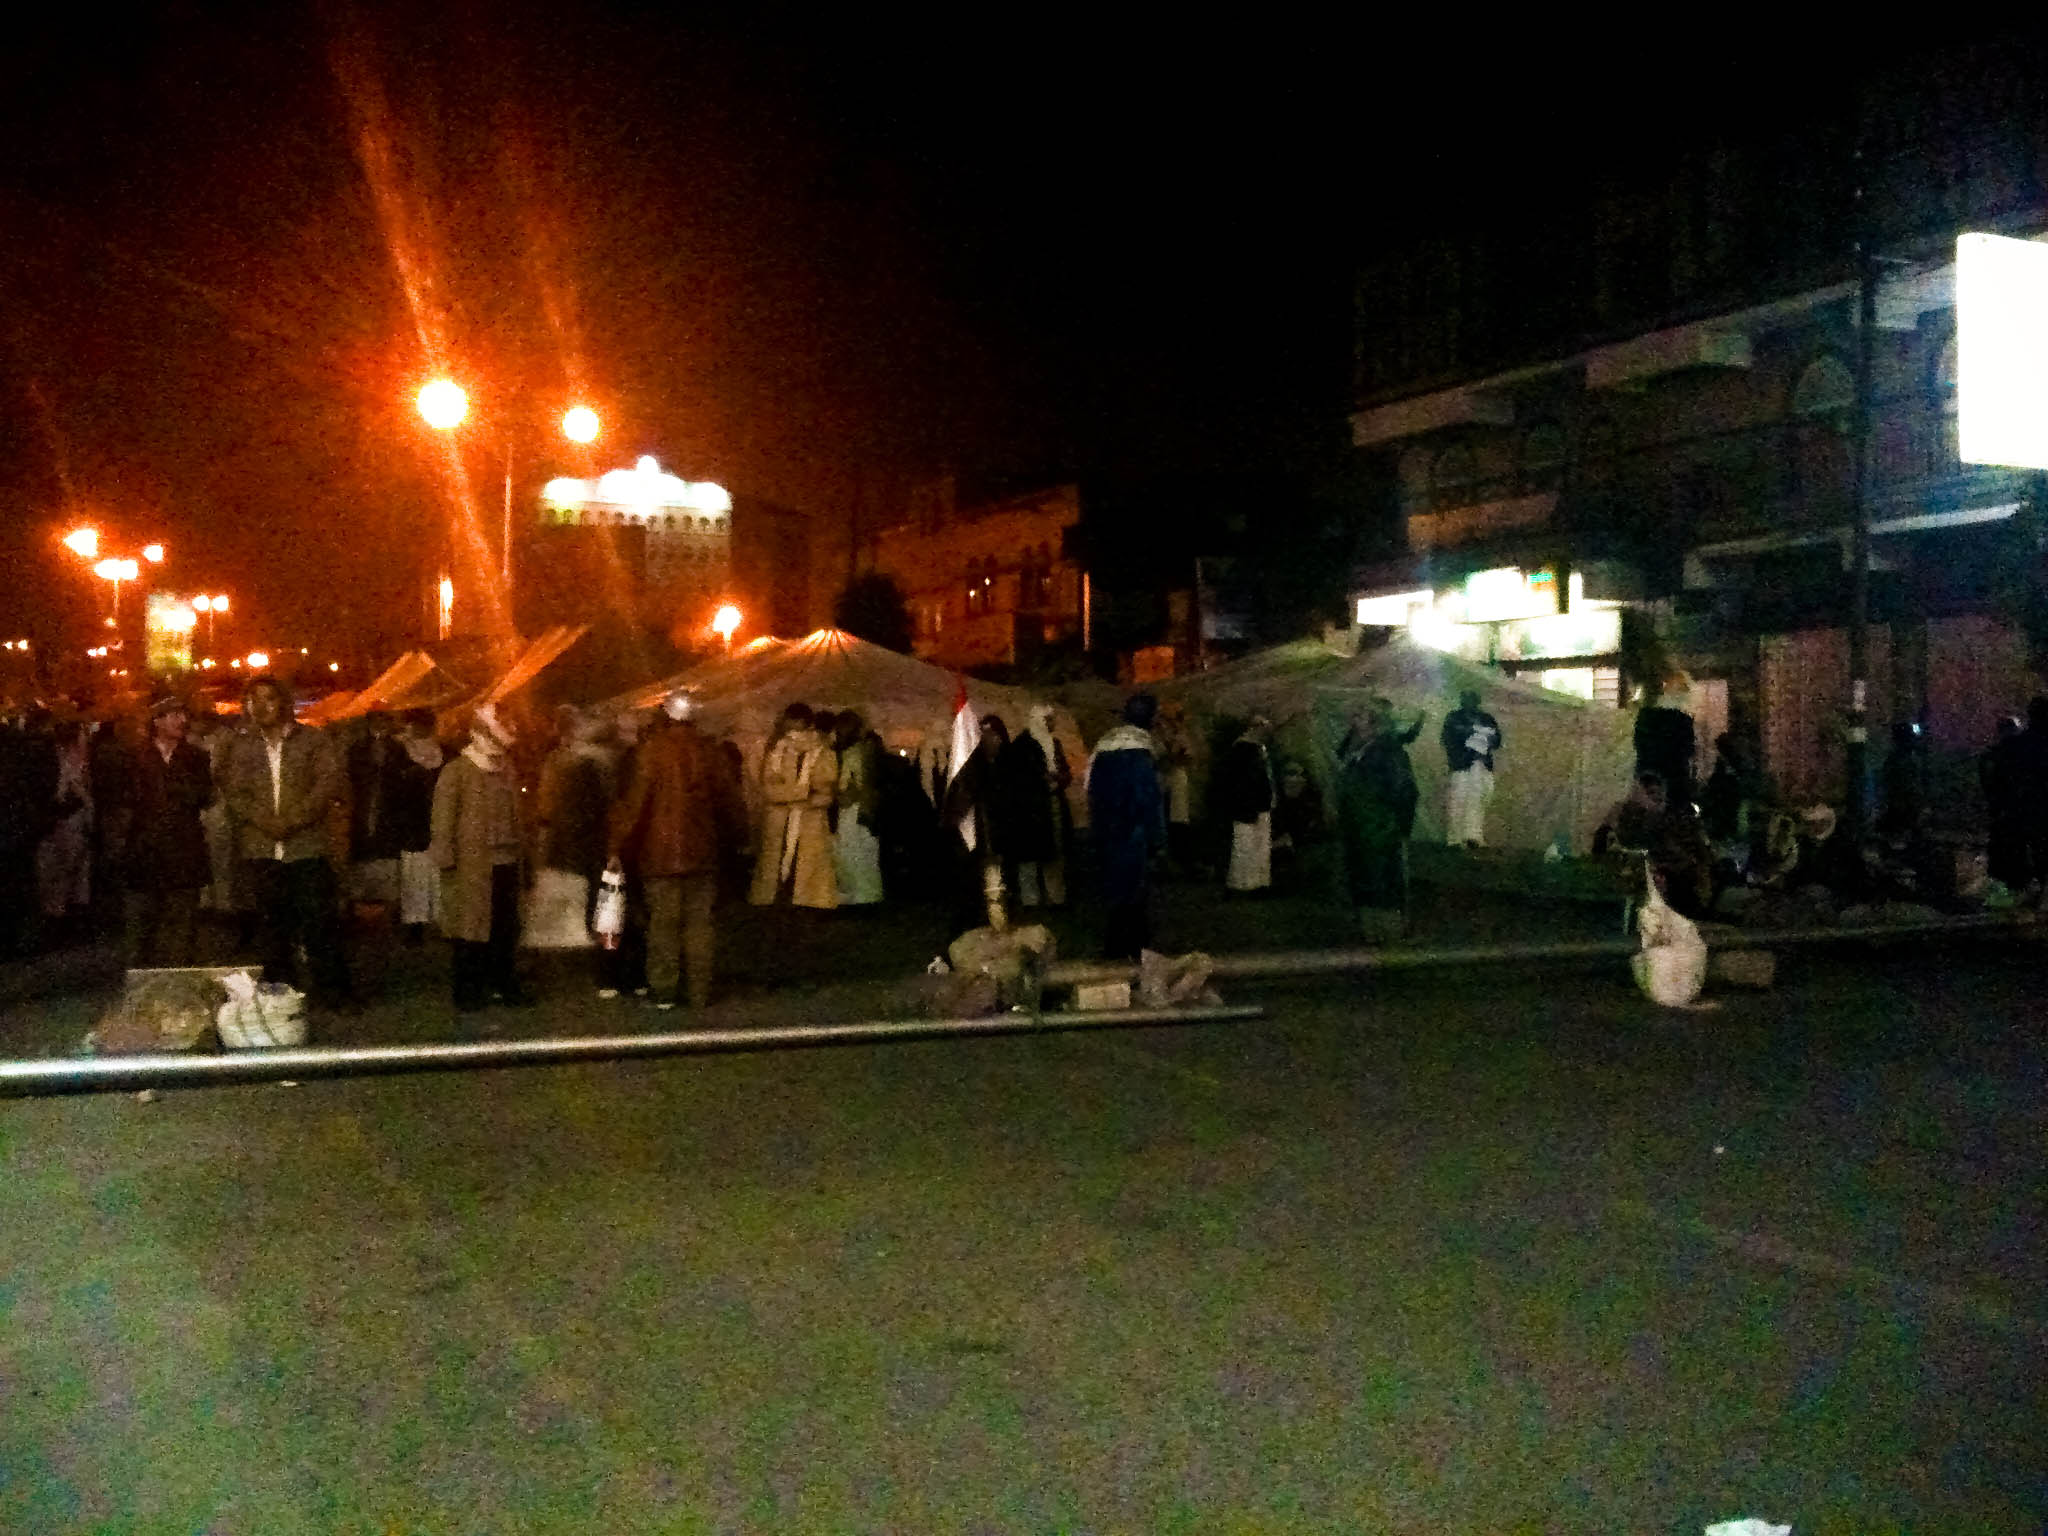 a group of people are gathered near the street